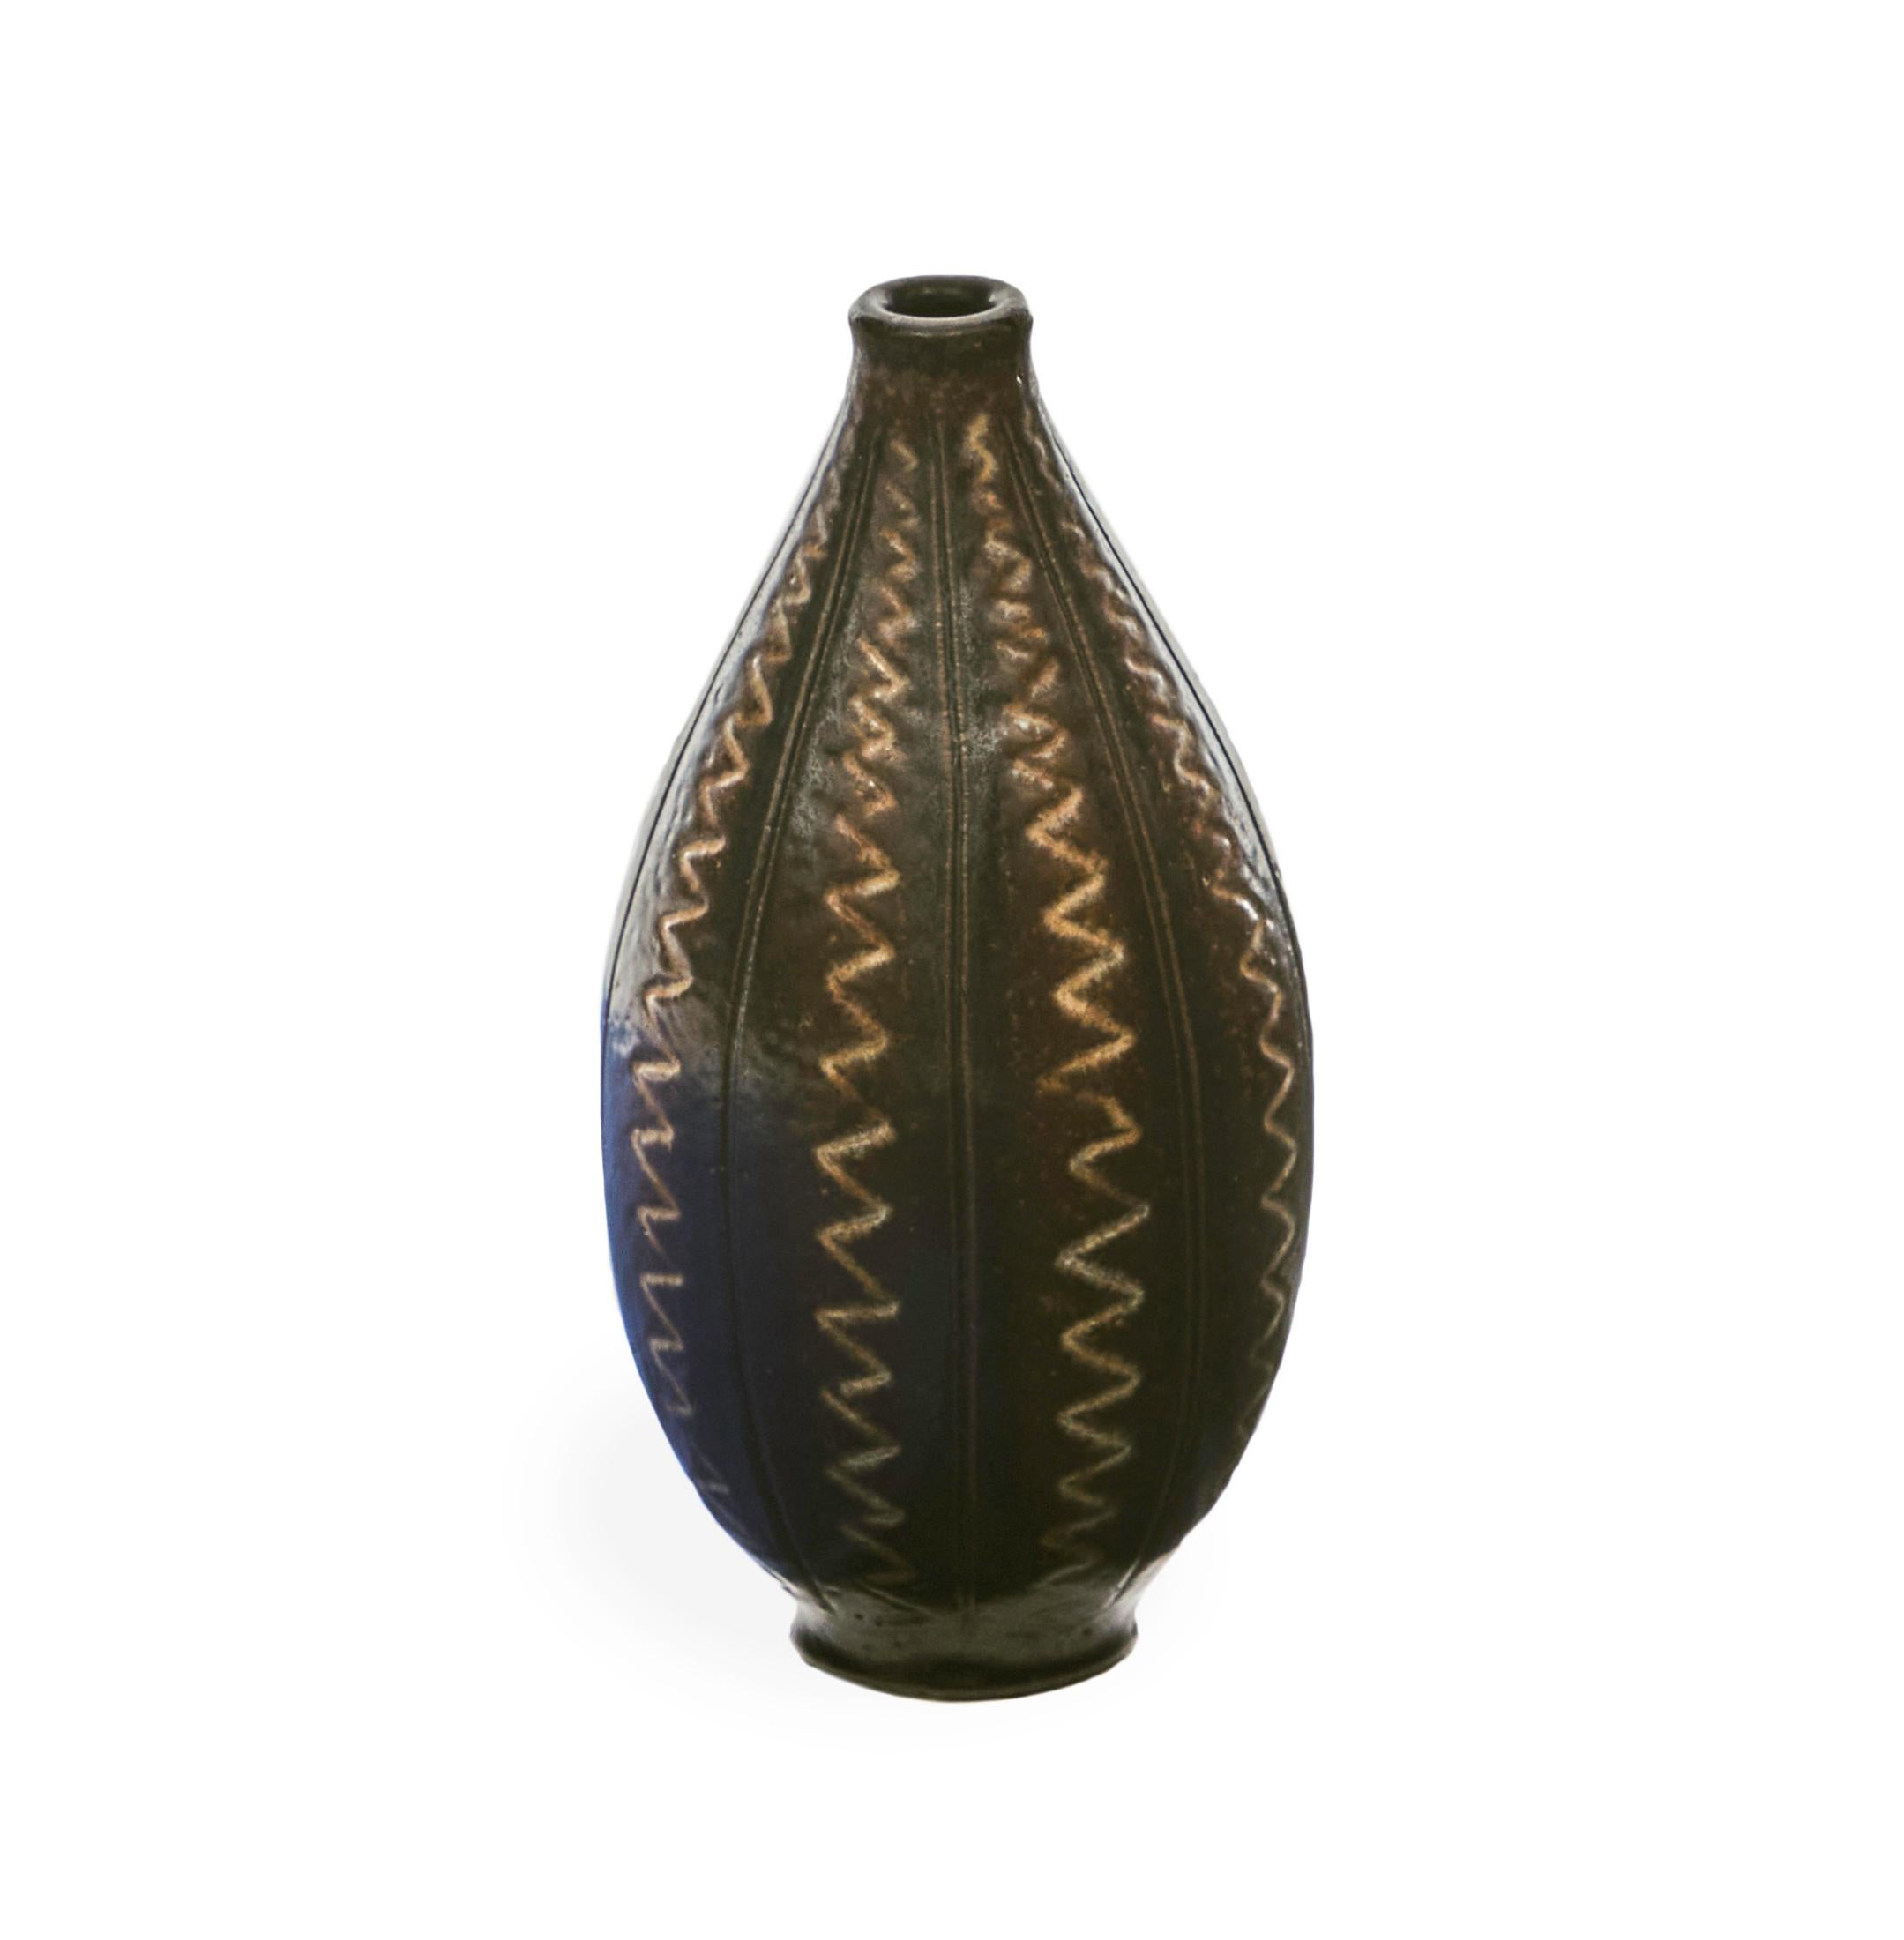 Created by the Swedish ceramist Arthur Andersson in the middle of the 20th century, these voluminous vases are noteworthy for their formal symmetry and their banded designs, which often run in either horizontal or vertical patterns of zig zags,